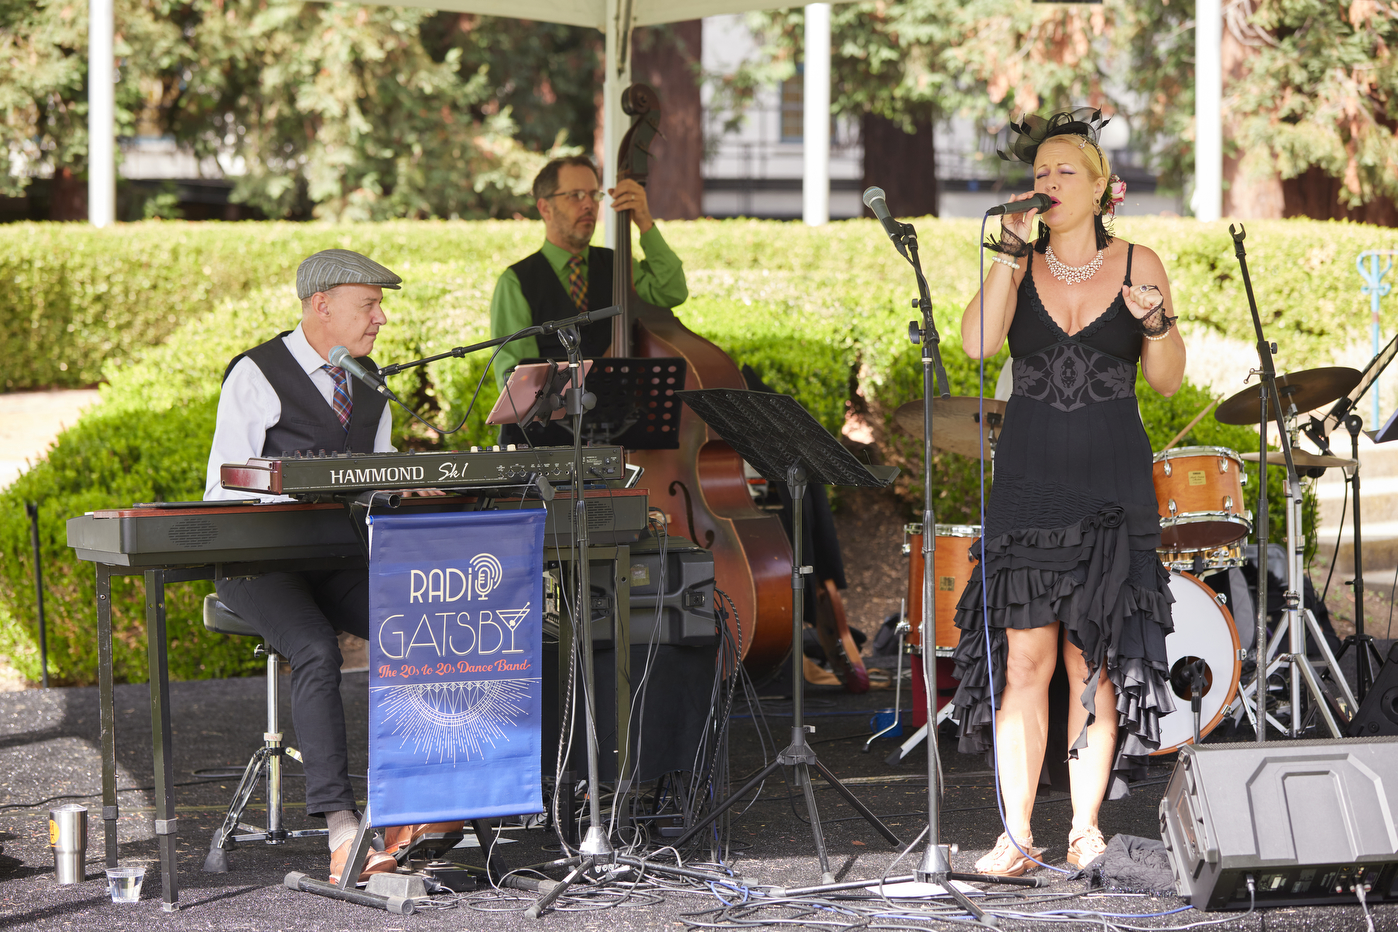 Radio Gatsby group performing on stage at Oakland campus.